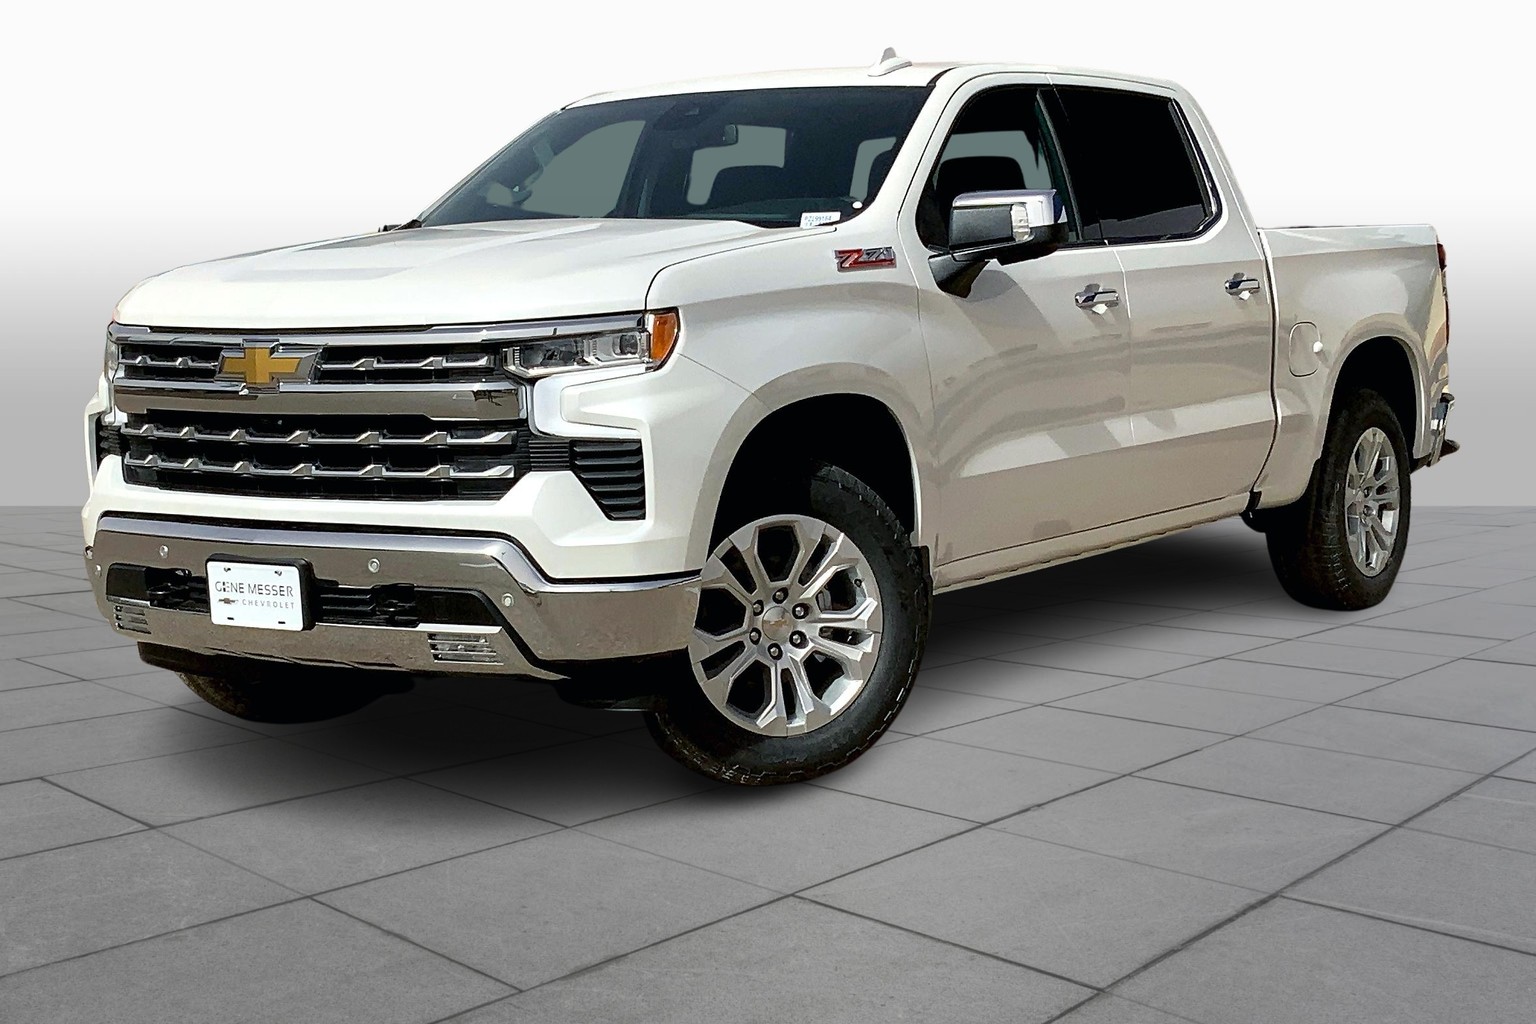 Unlock Your Full Speed Potential: Turn off Speed Limit Exceeded Chevy Silverado